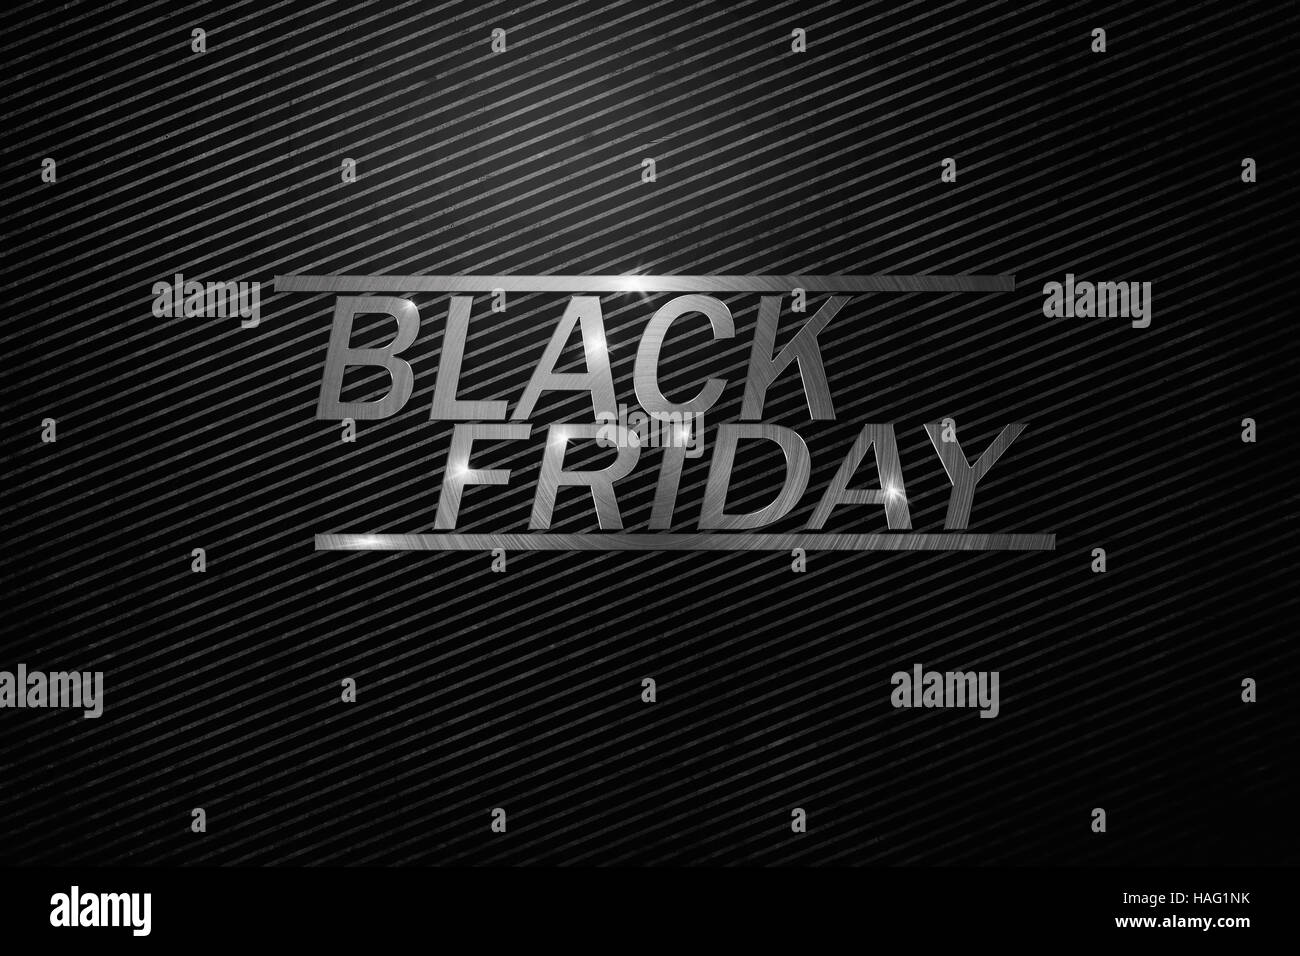 Black Friday text on black and white striped background Stock Photo